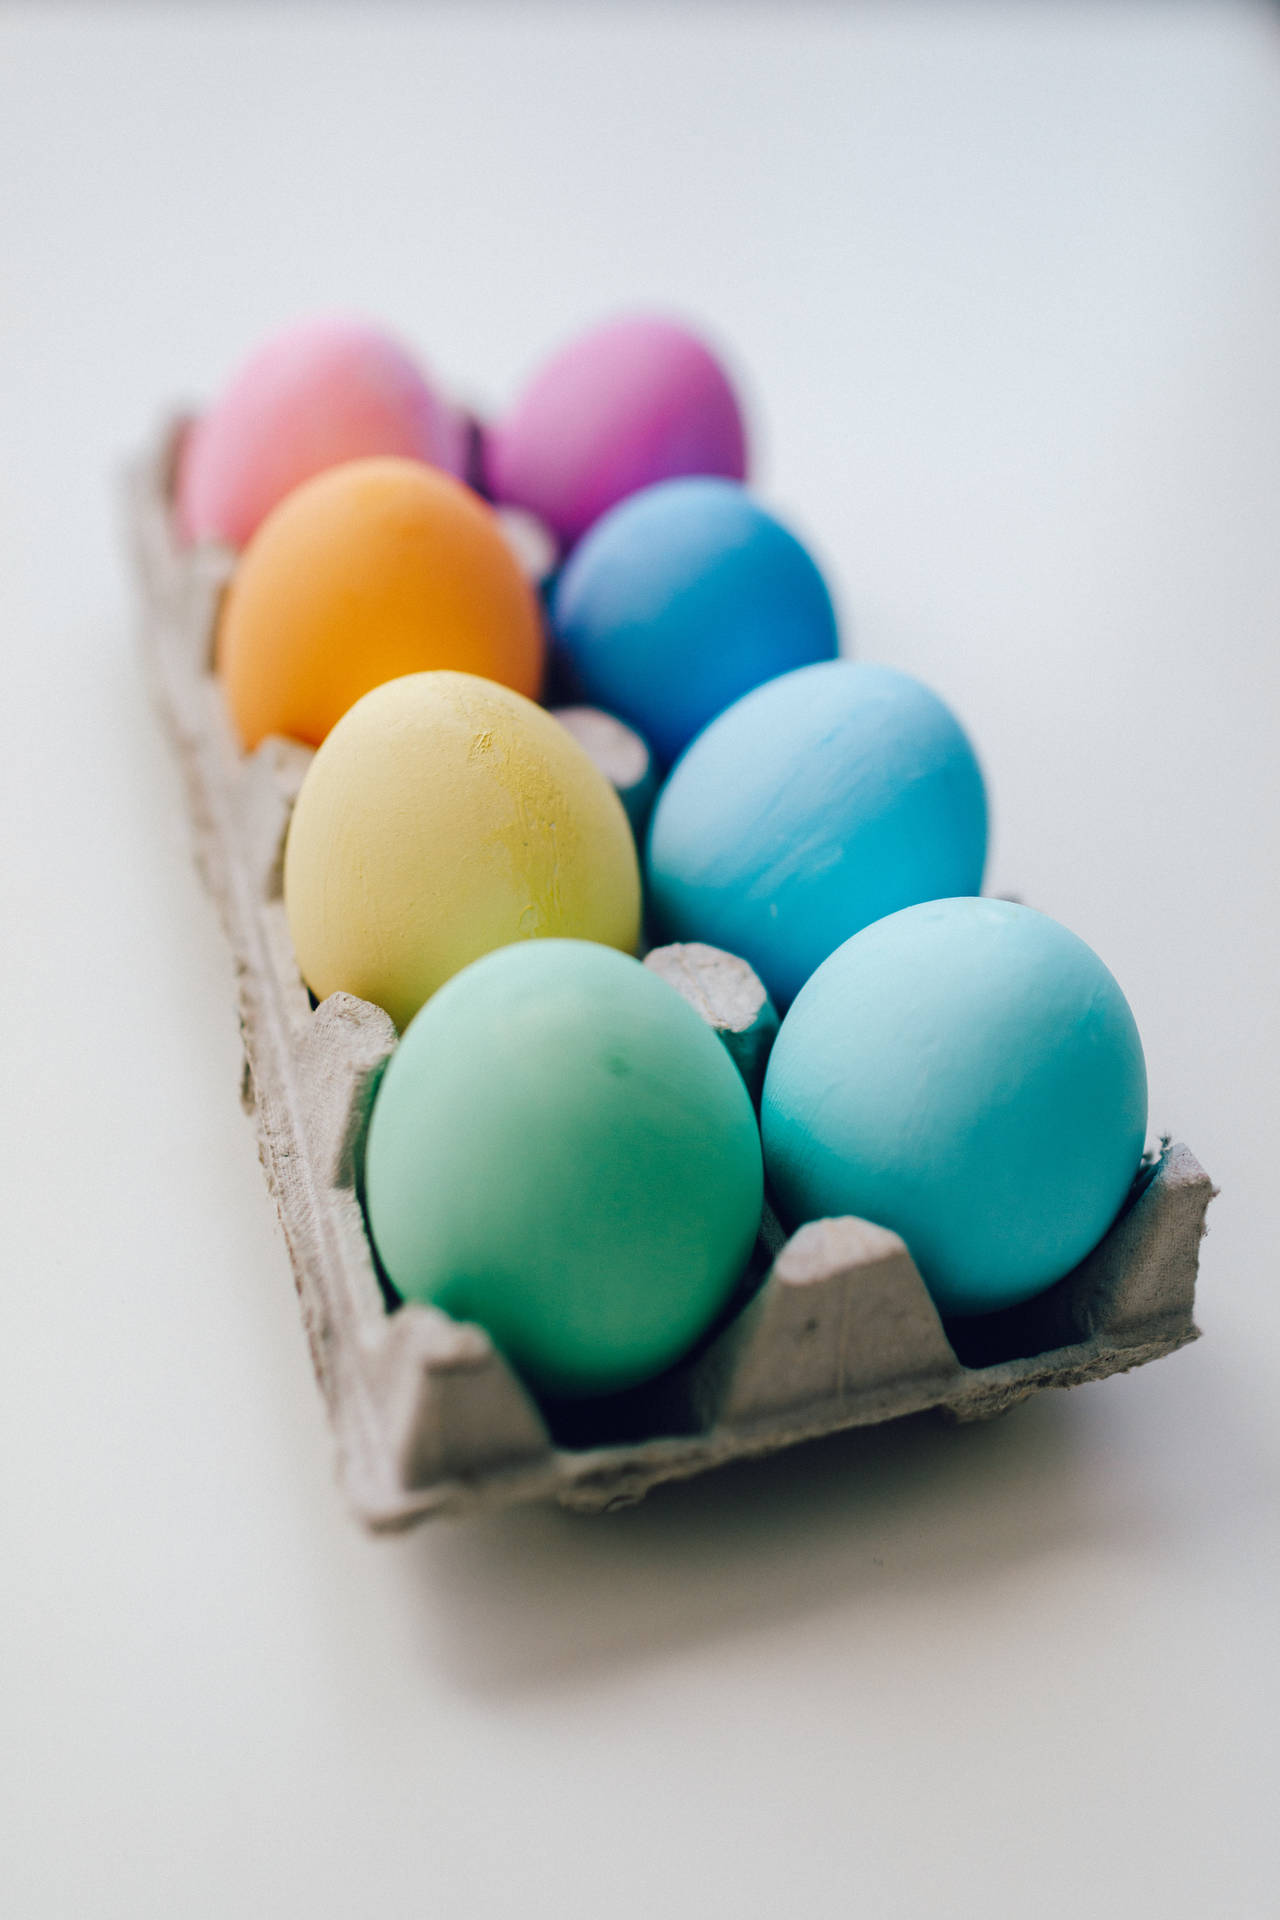 Solid Pastel Colorful Eggs Wallpaper